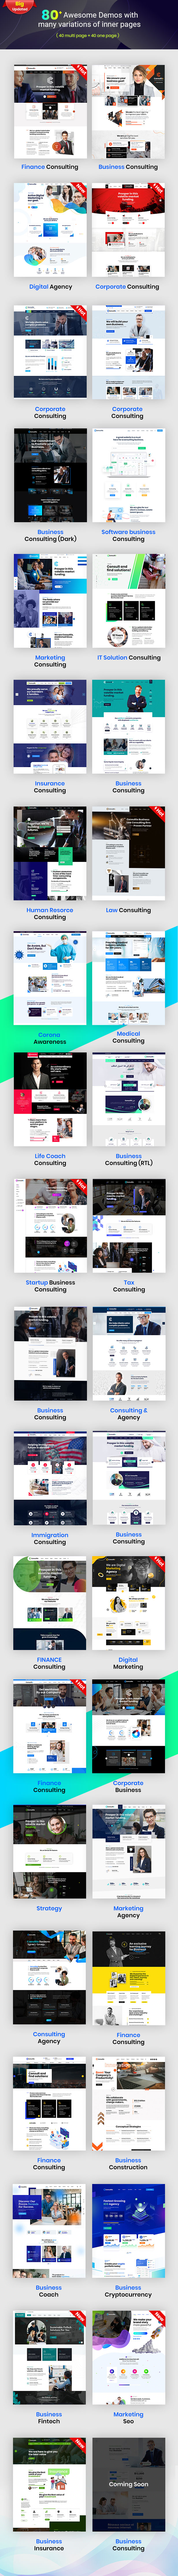 Consulting & Business WordPress Theme